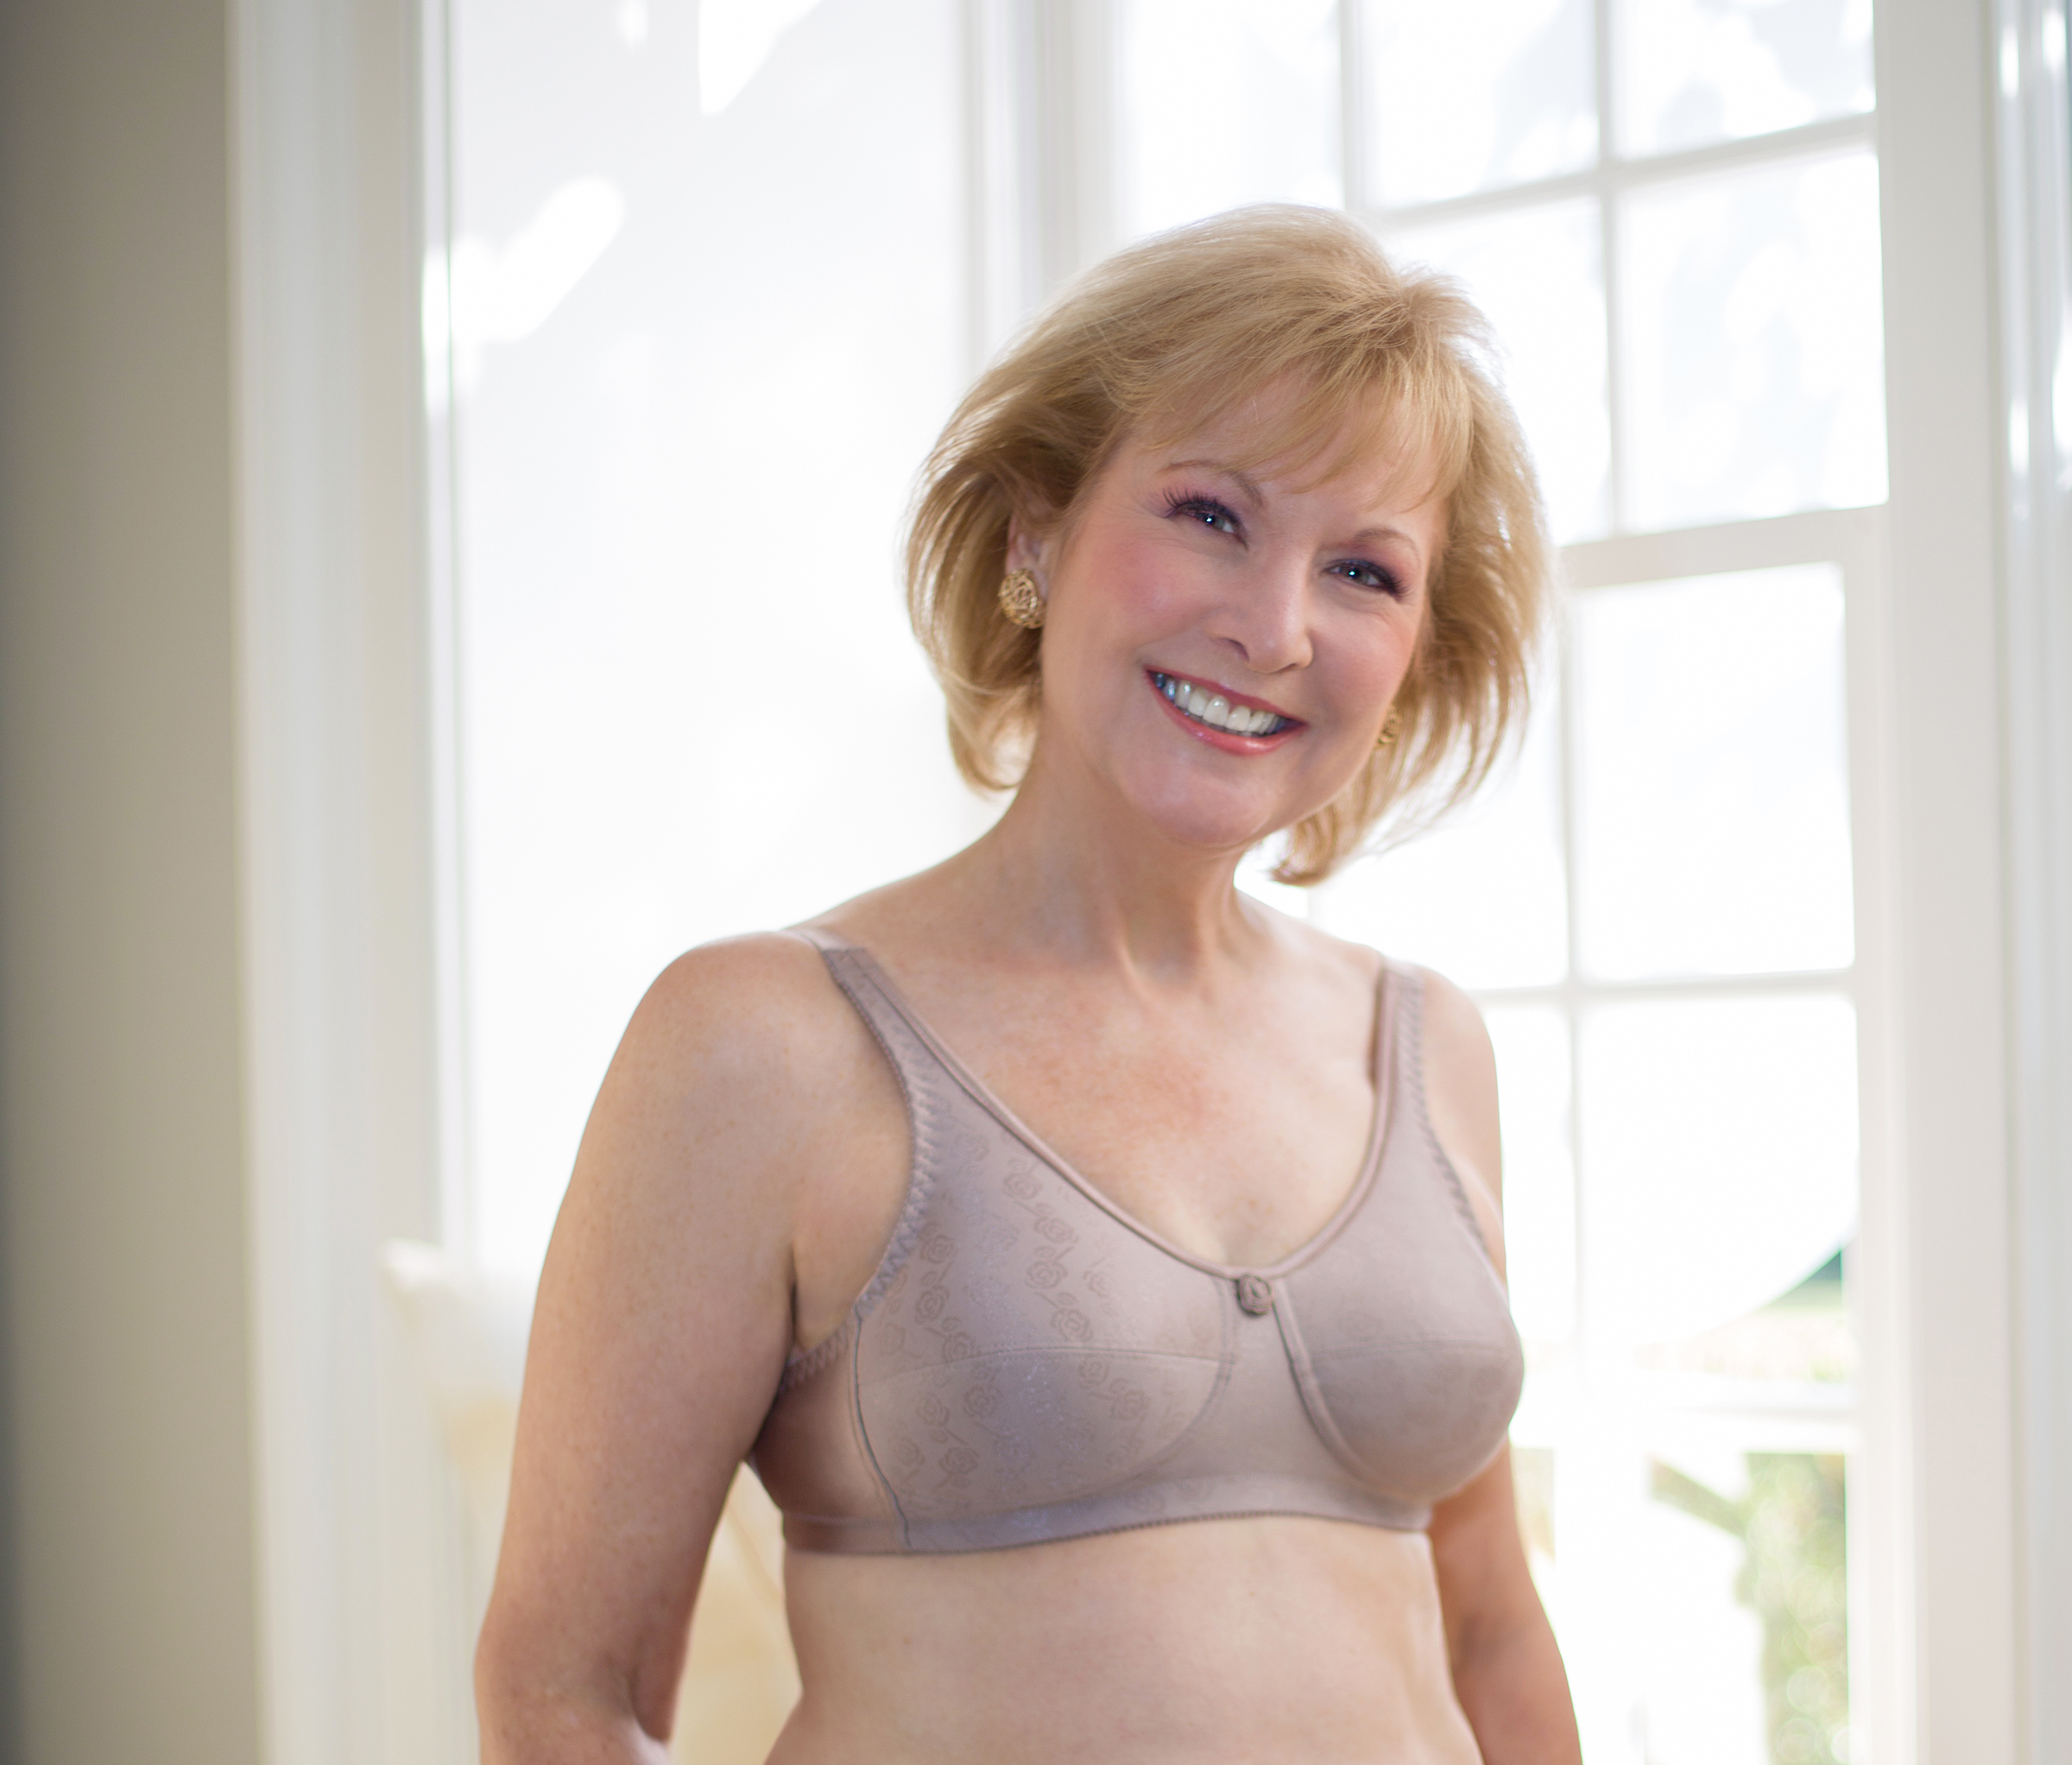 American Breast Care The Rose Contour Mastectomy Bra 103 - Sizes AA to DDD